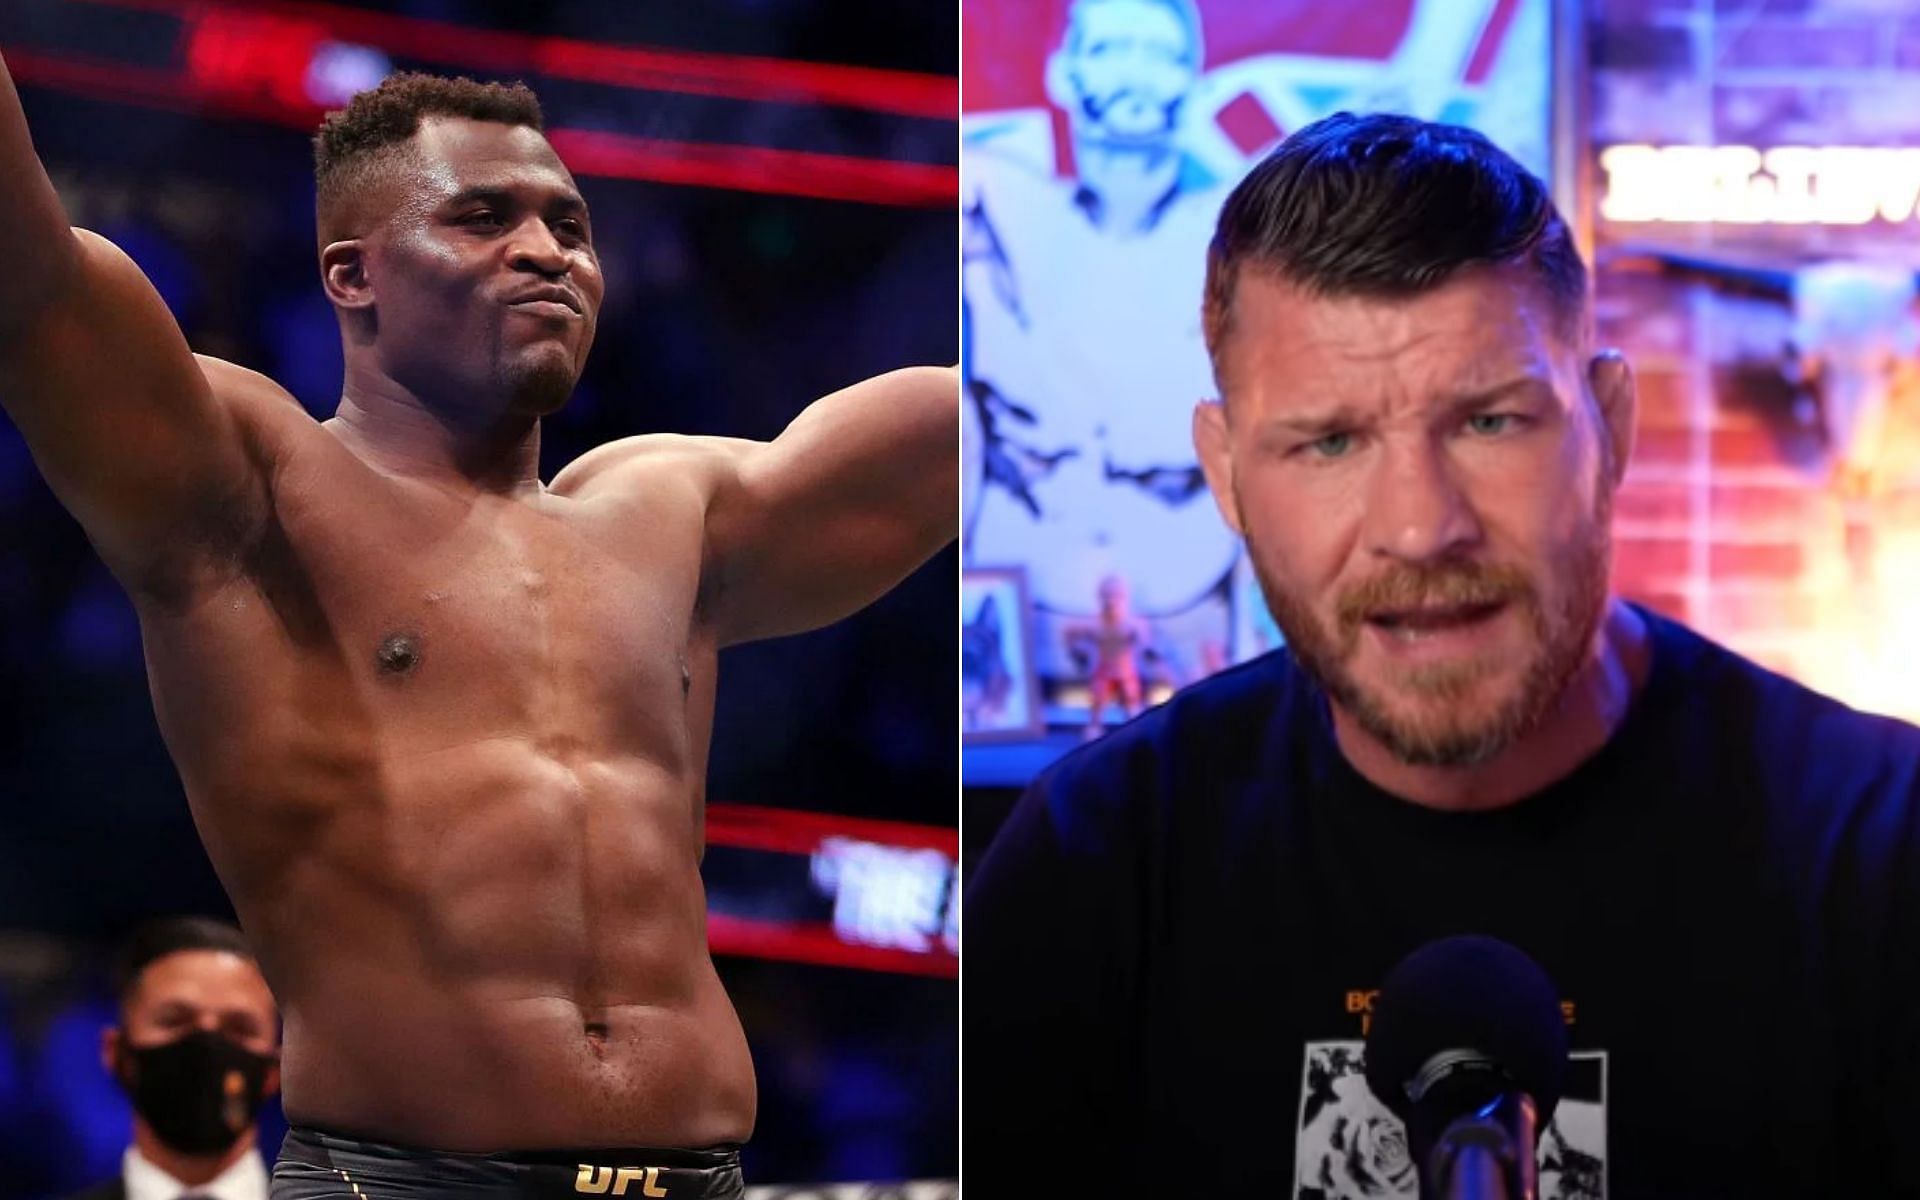 Francis Ngannou [Left], and Michael Bisping [Right] [Photo credit Michael Bisping - YouTube]